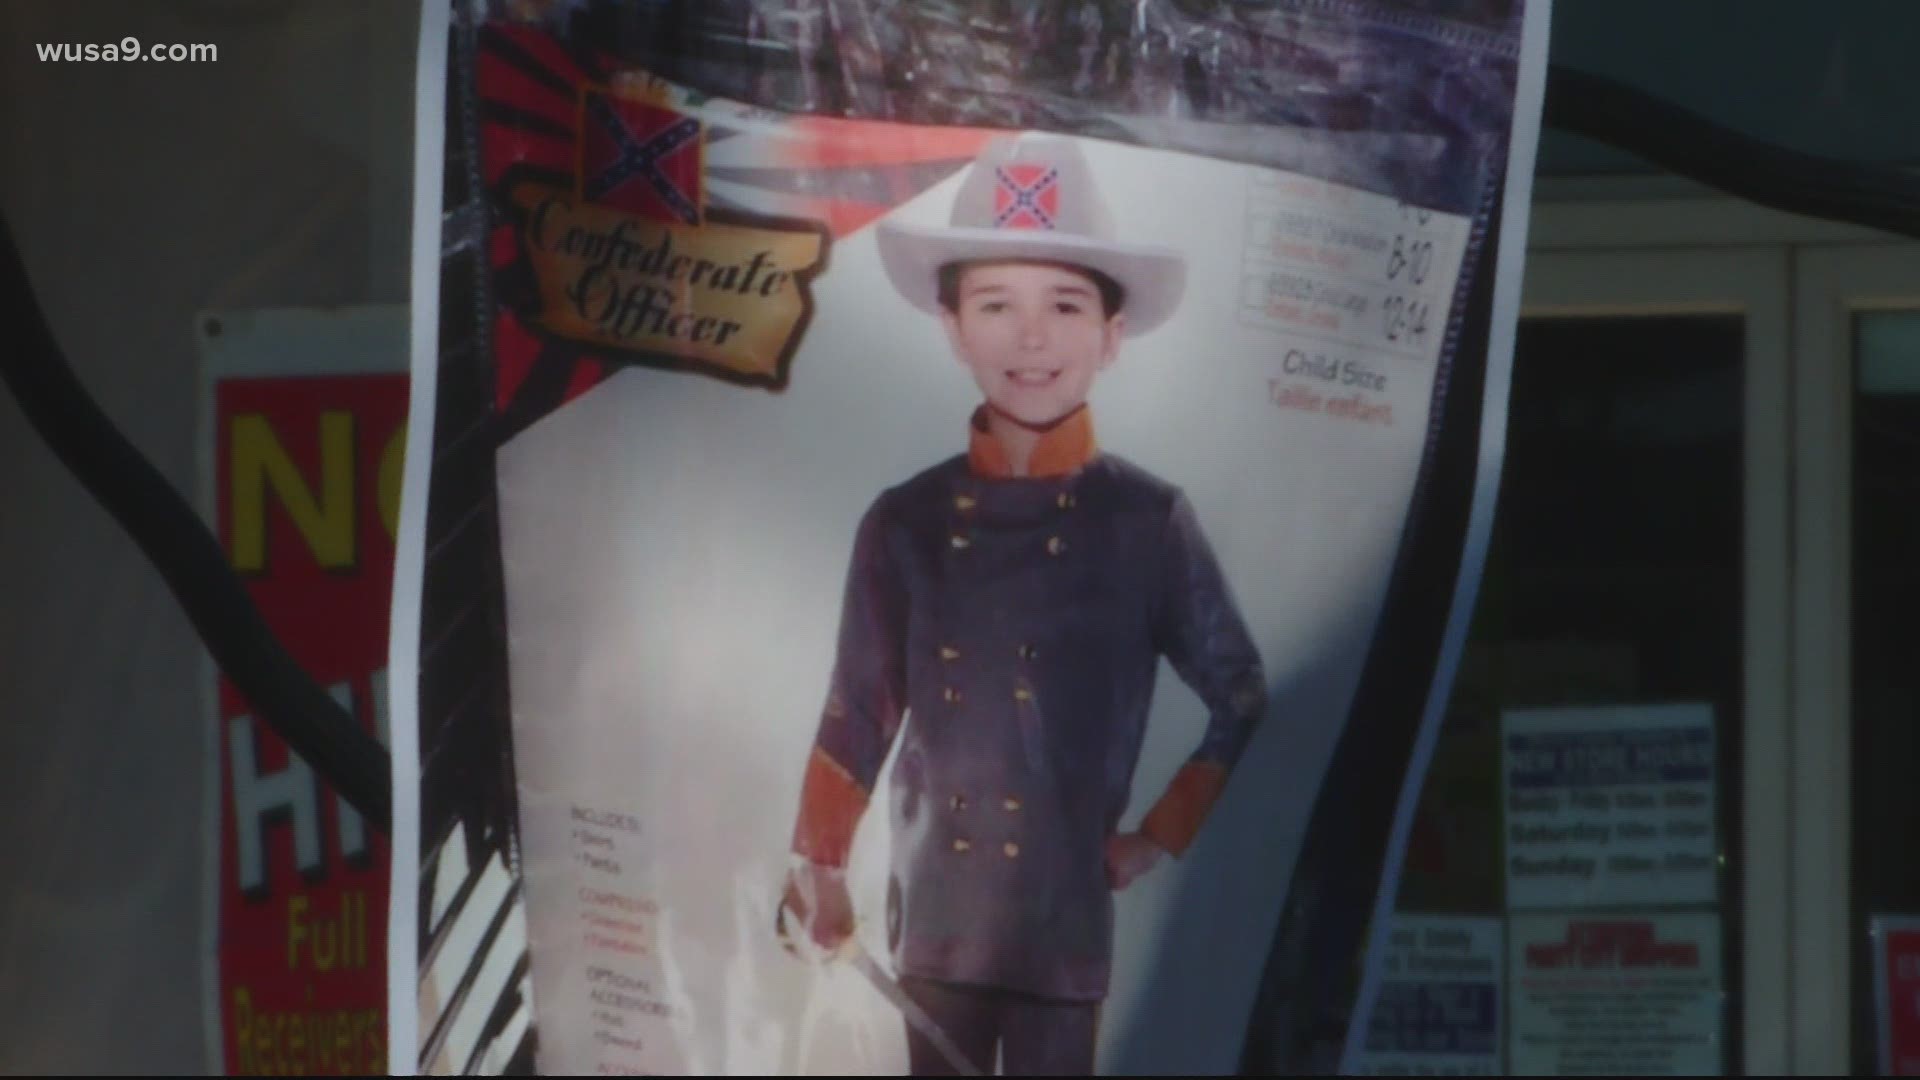 The mother of two adopted Black daughters said the Party City in Bailey's Crossroads is selling child Confederate Civil War costumes.